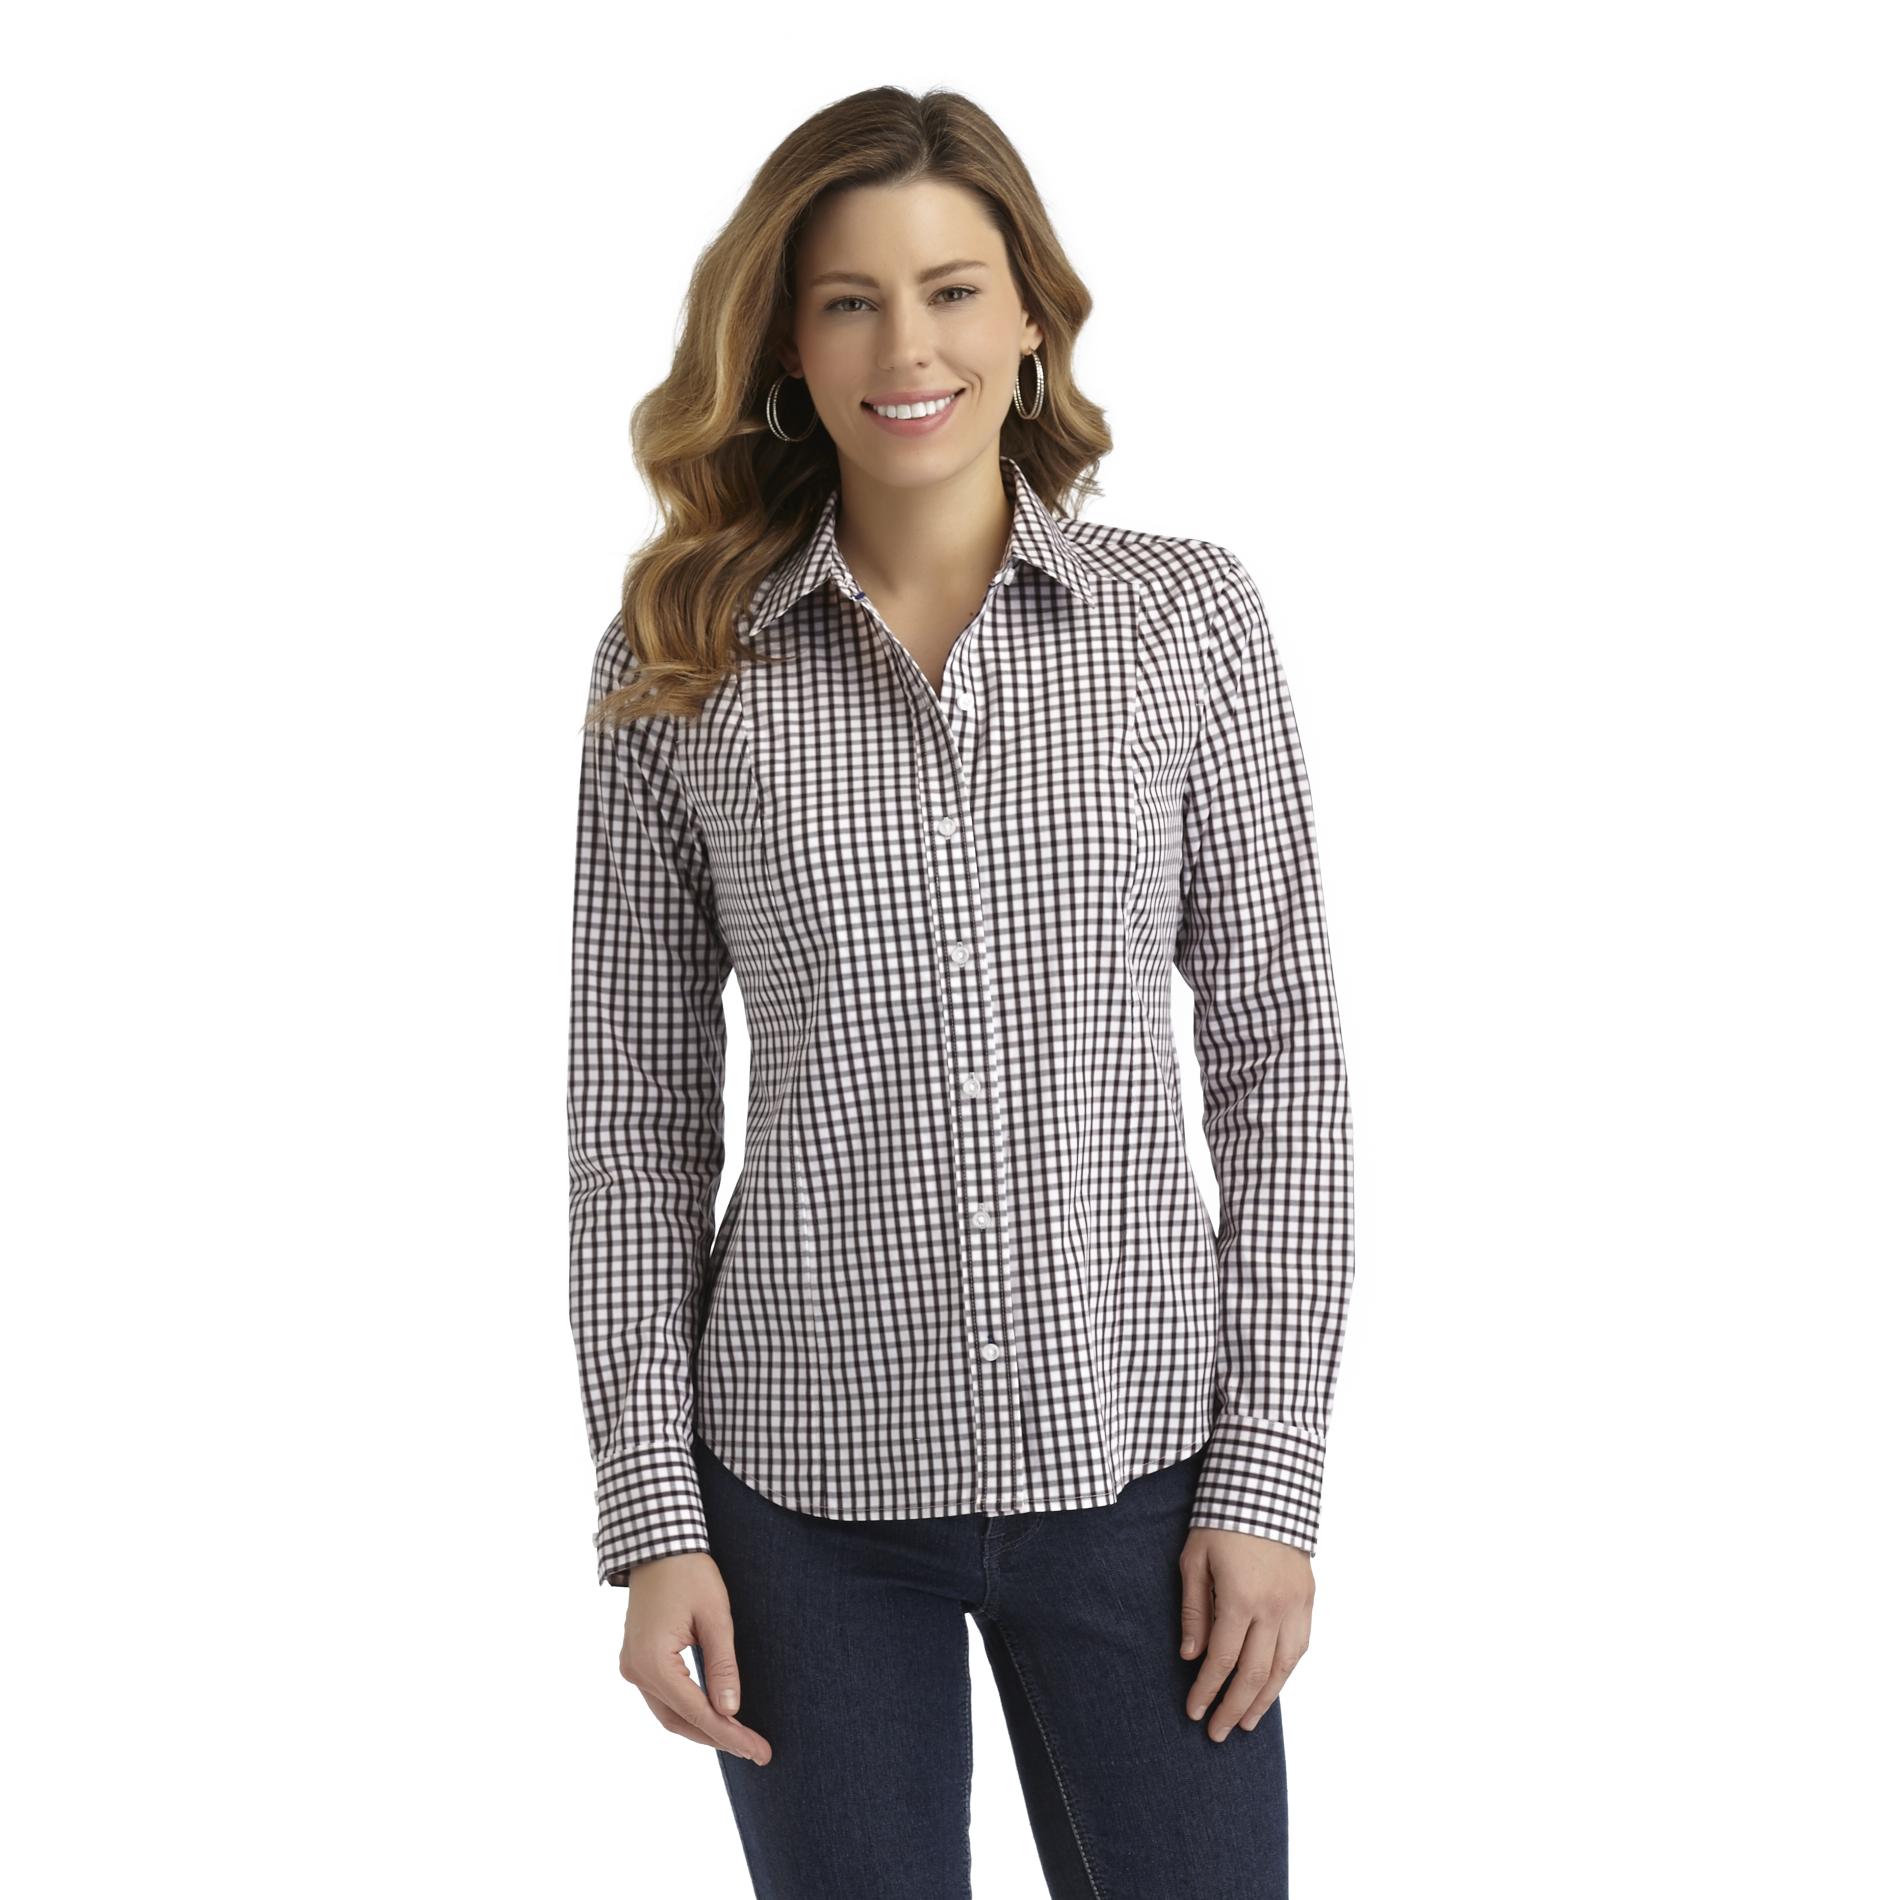 Attention Women's Button-Front Shirt - Grid Pattern